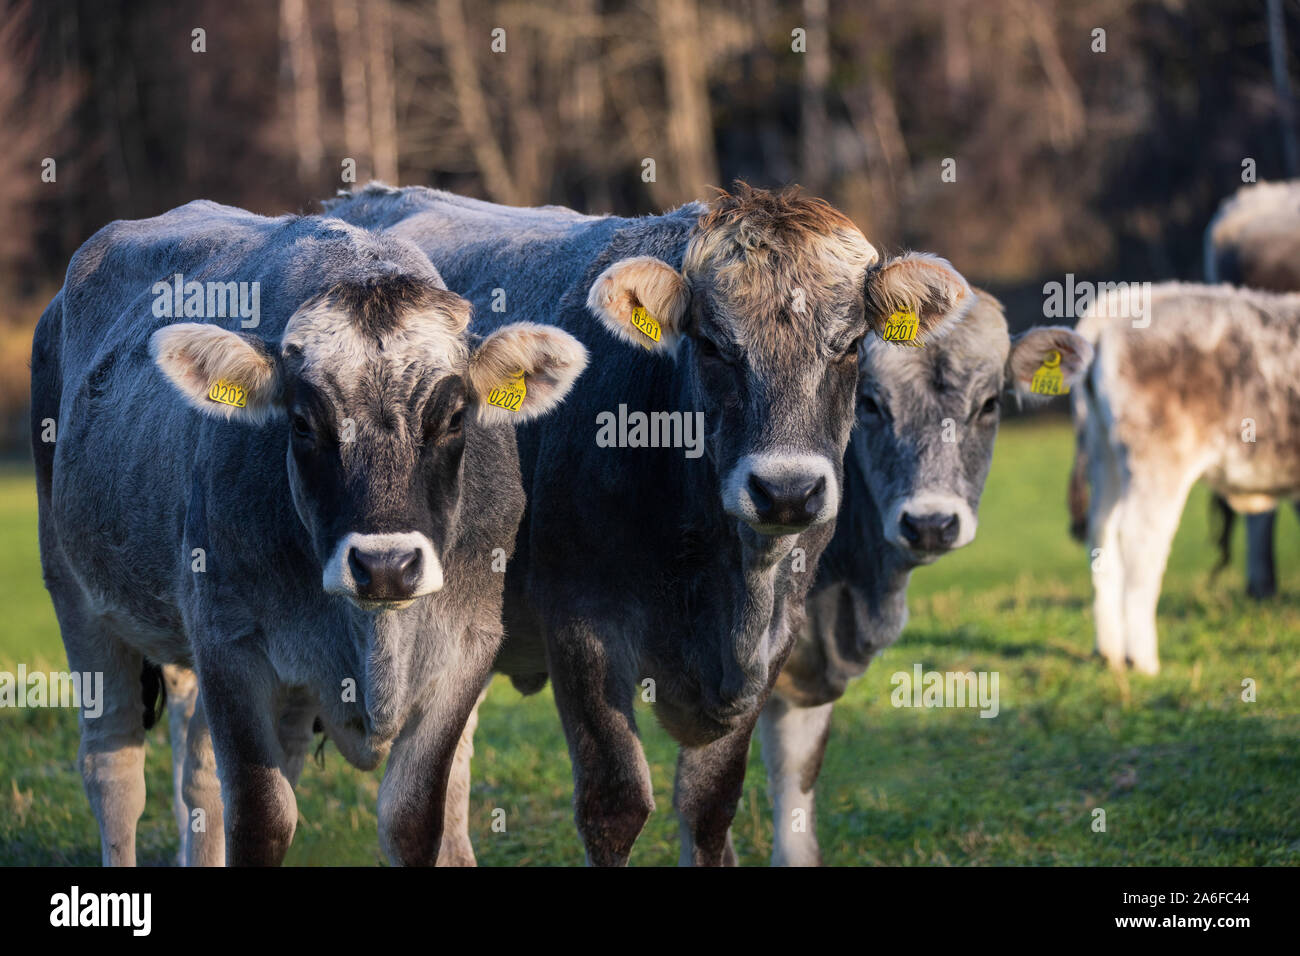 Cattle are commonly raised as livestock for meat and for milk. Happy Animals  Produce Better Food Stock Photo - Alamy